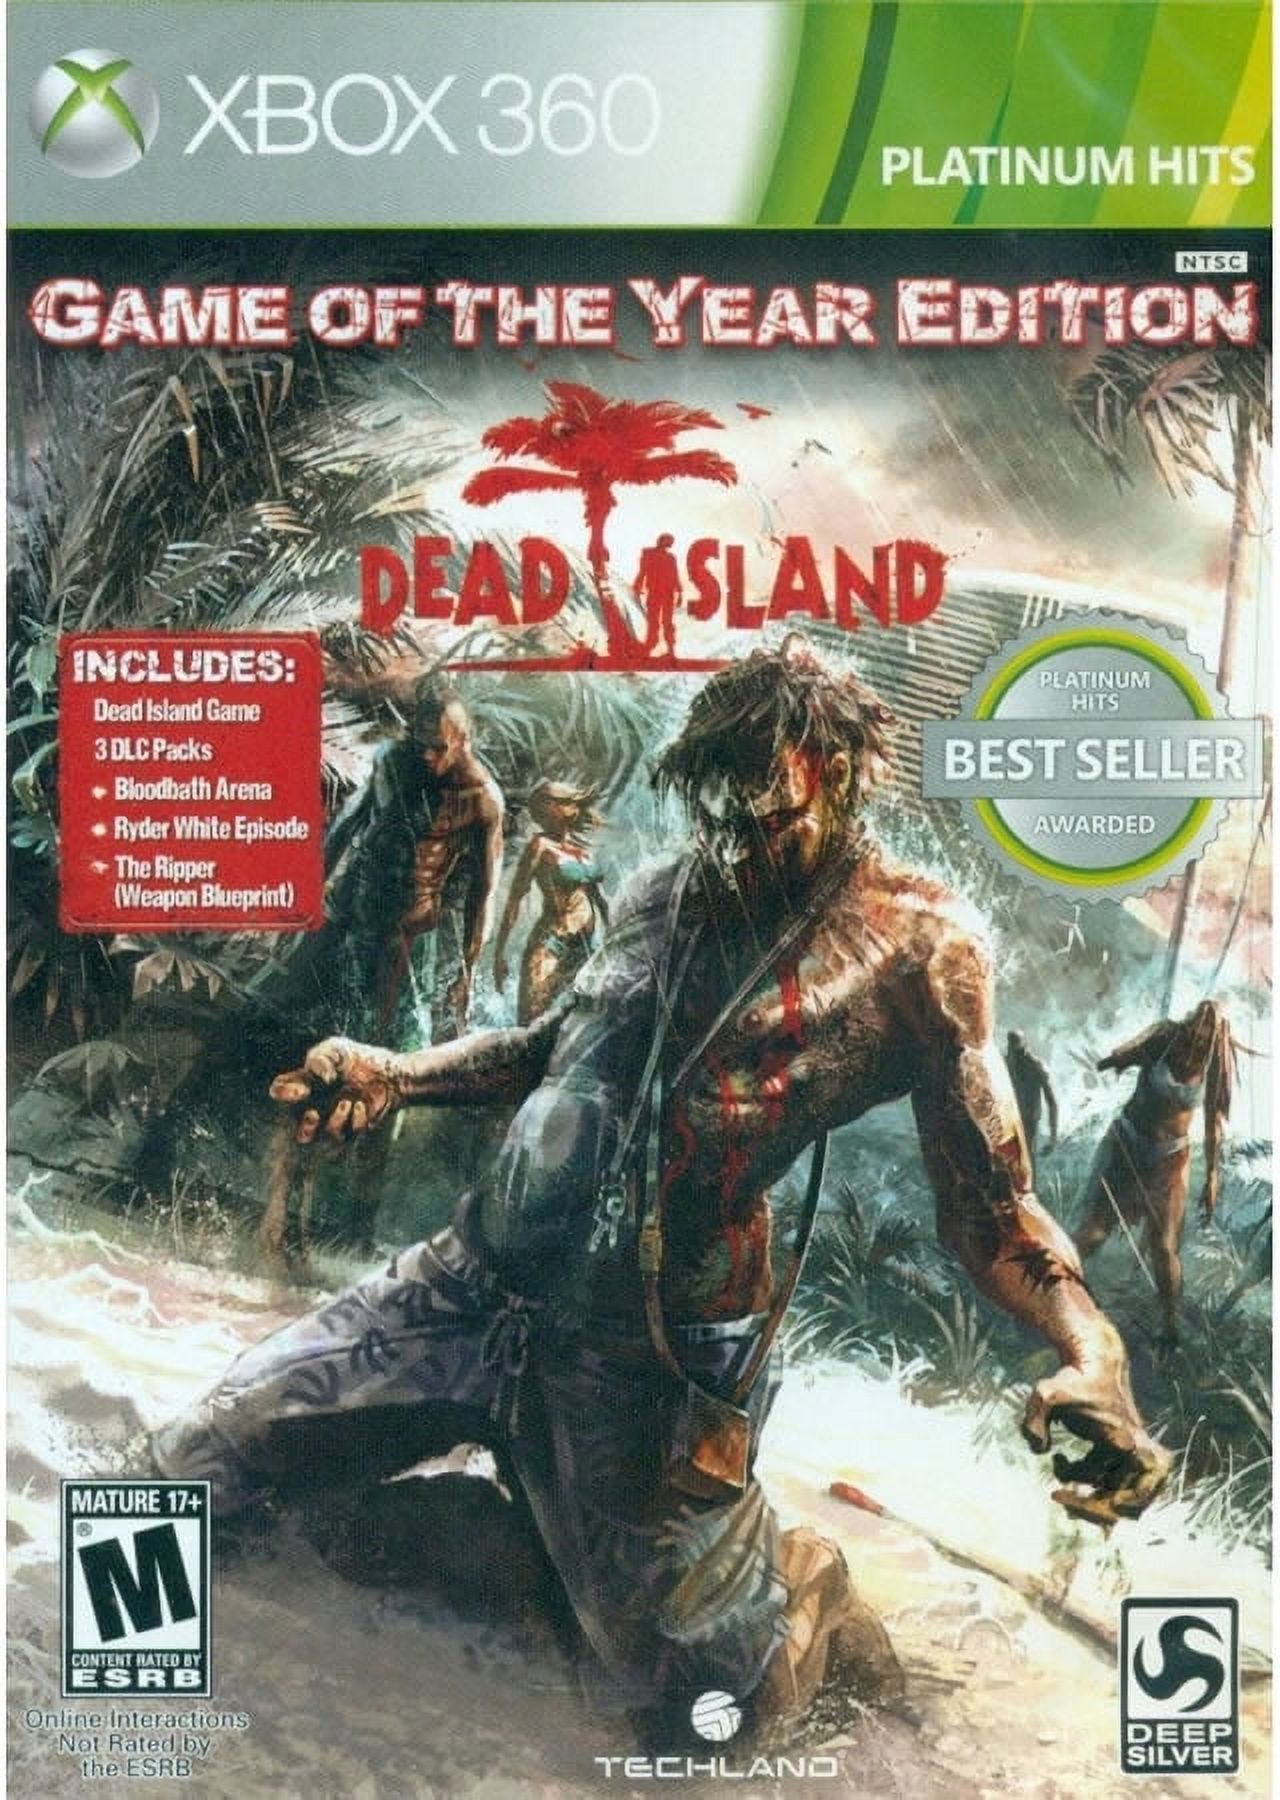 Dead Island Game of the Year (Platinum Hits) Xbox 360 - image 1 of 6